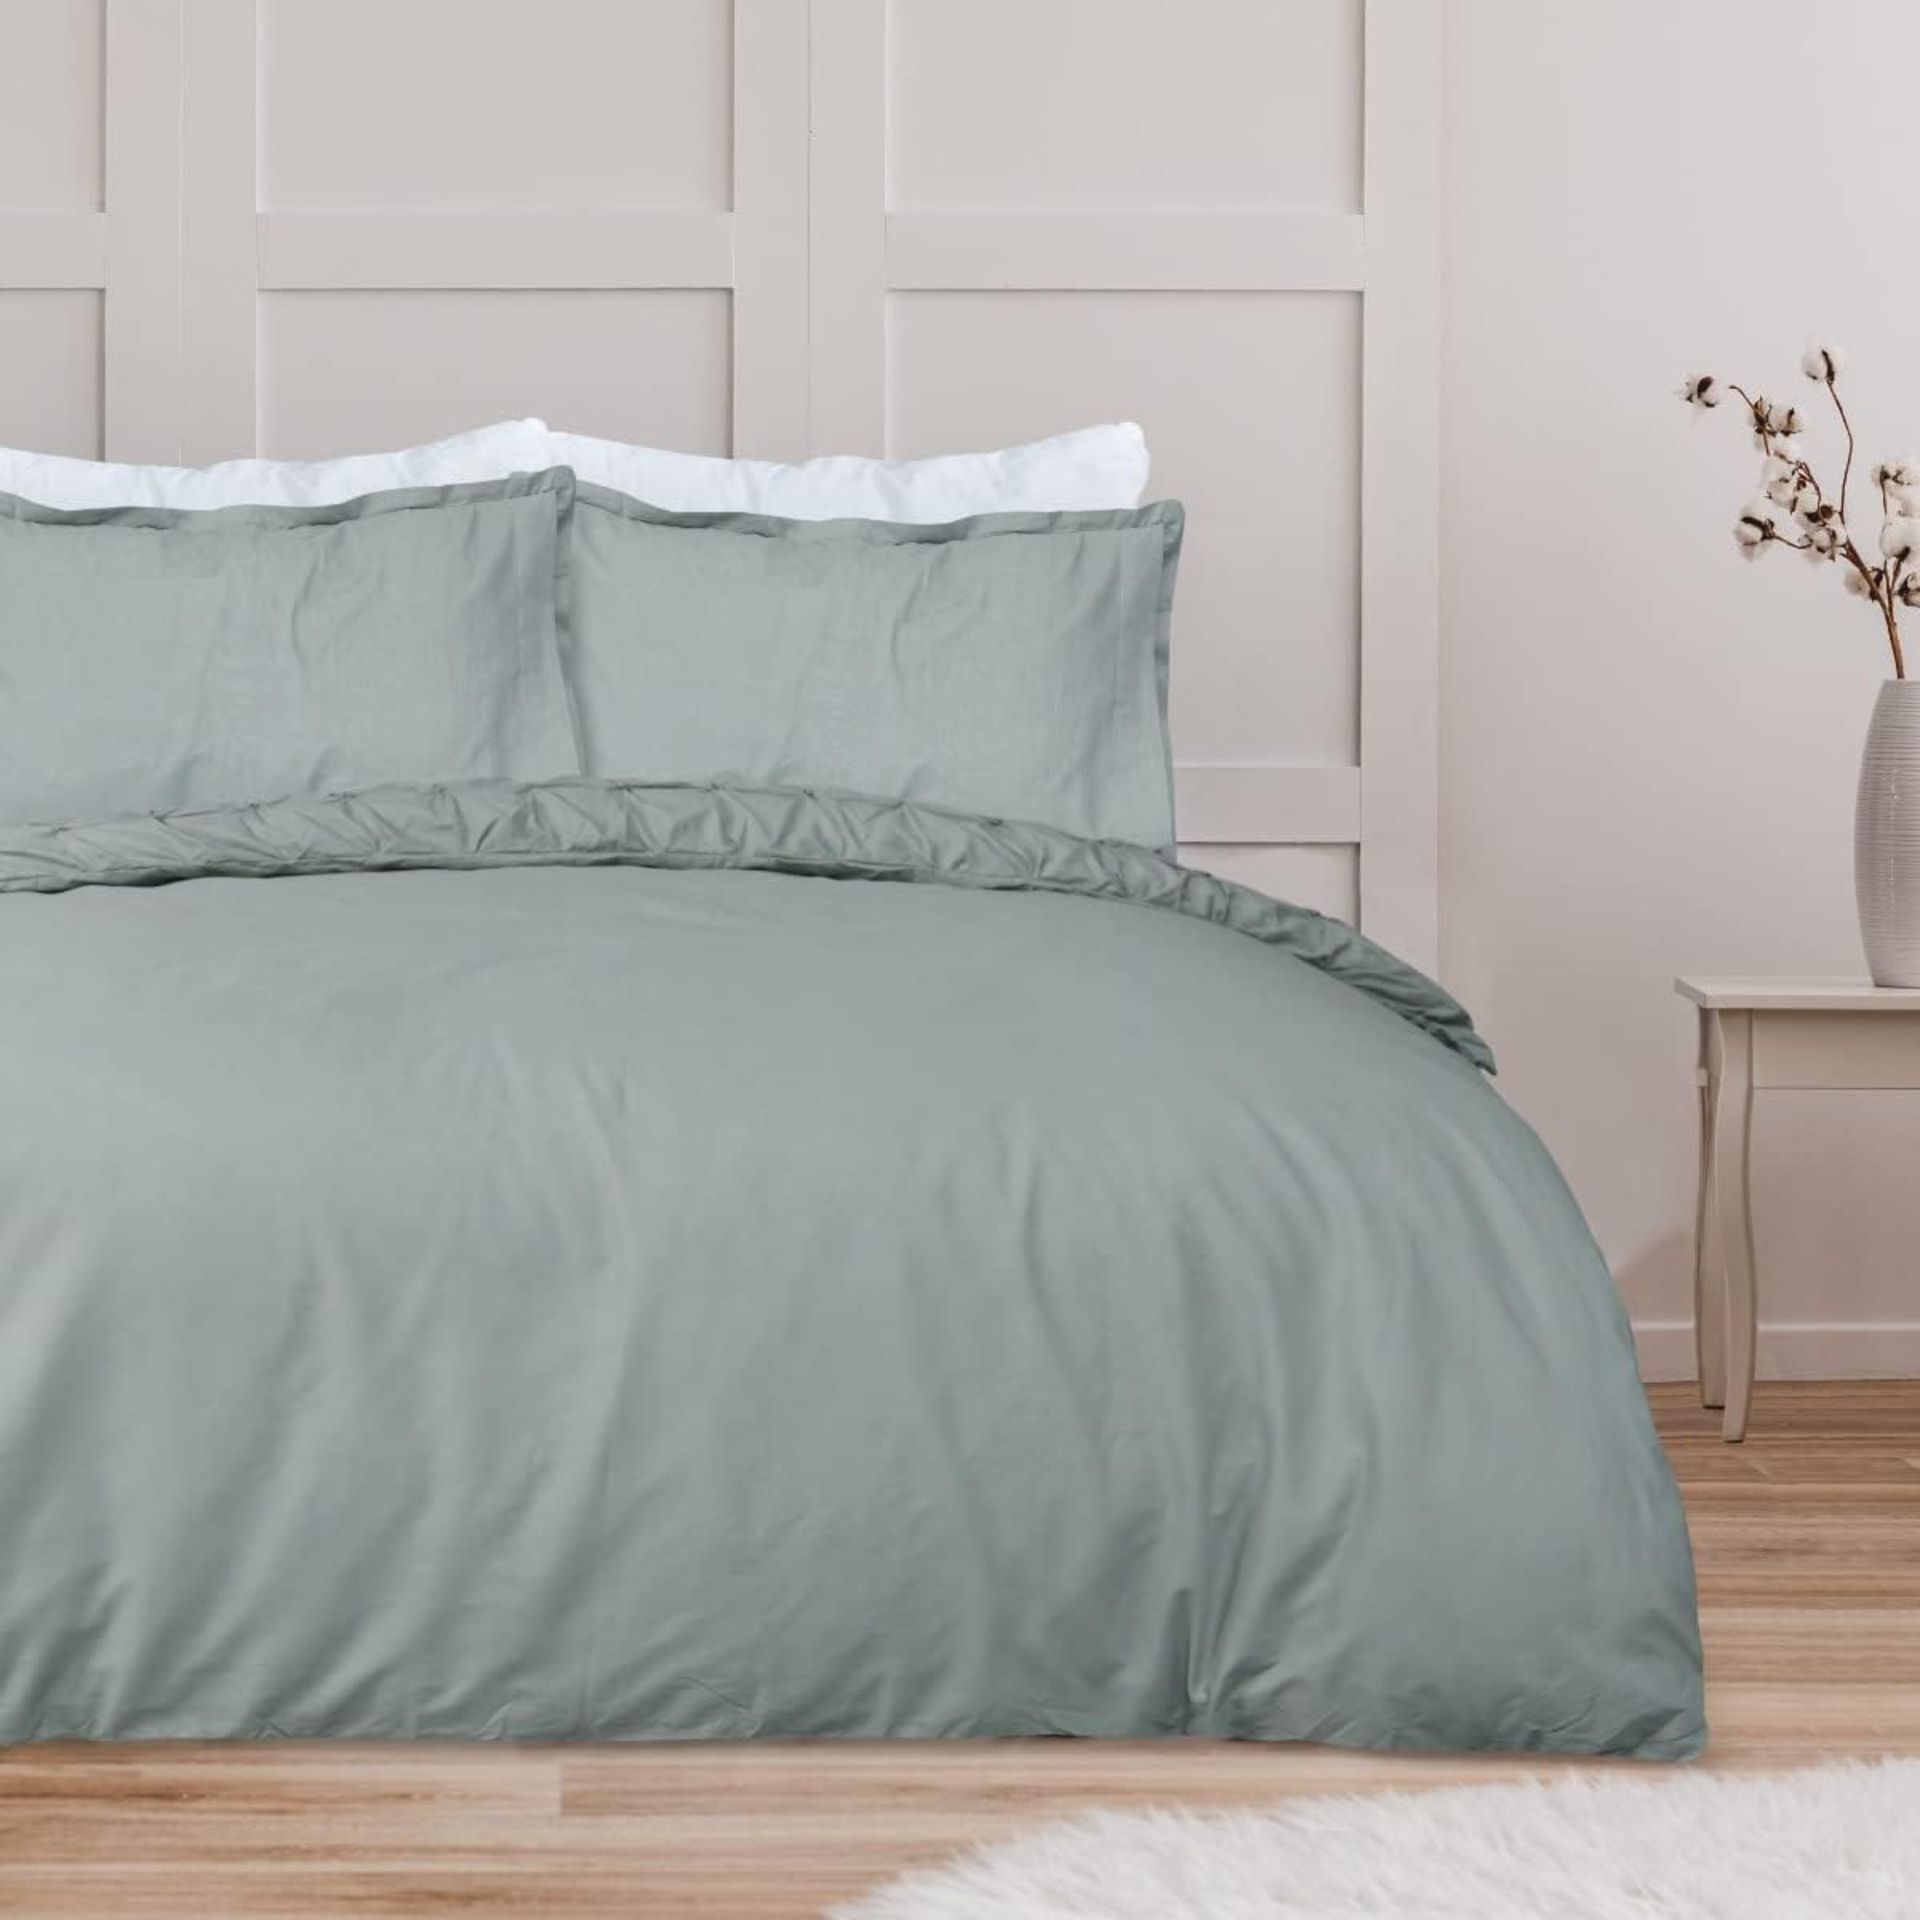 11x NEW & PACKAGED SLEEPDOWN Rouched Easy Care SINGLE Duvet Set - SAGE GREEN. RRP £22.99 EACH. (R7- - Image 3 of 4